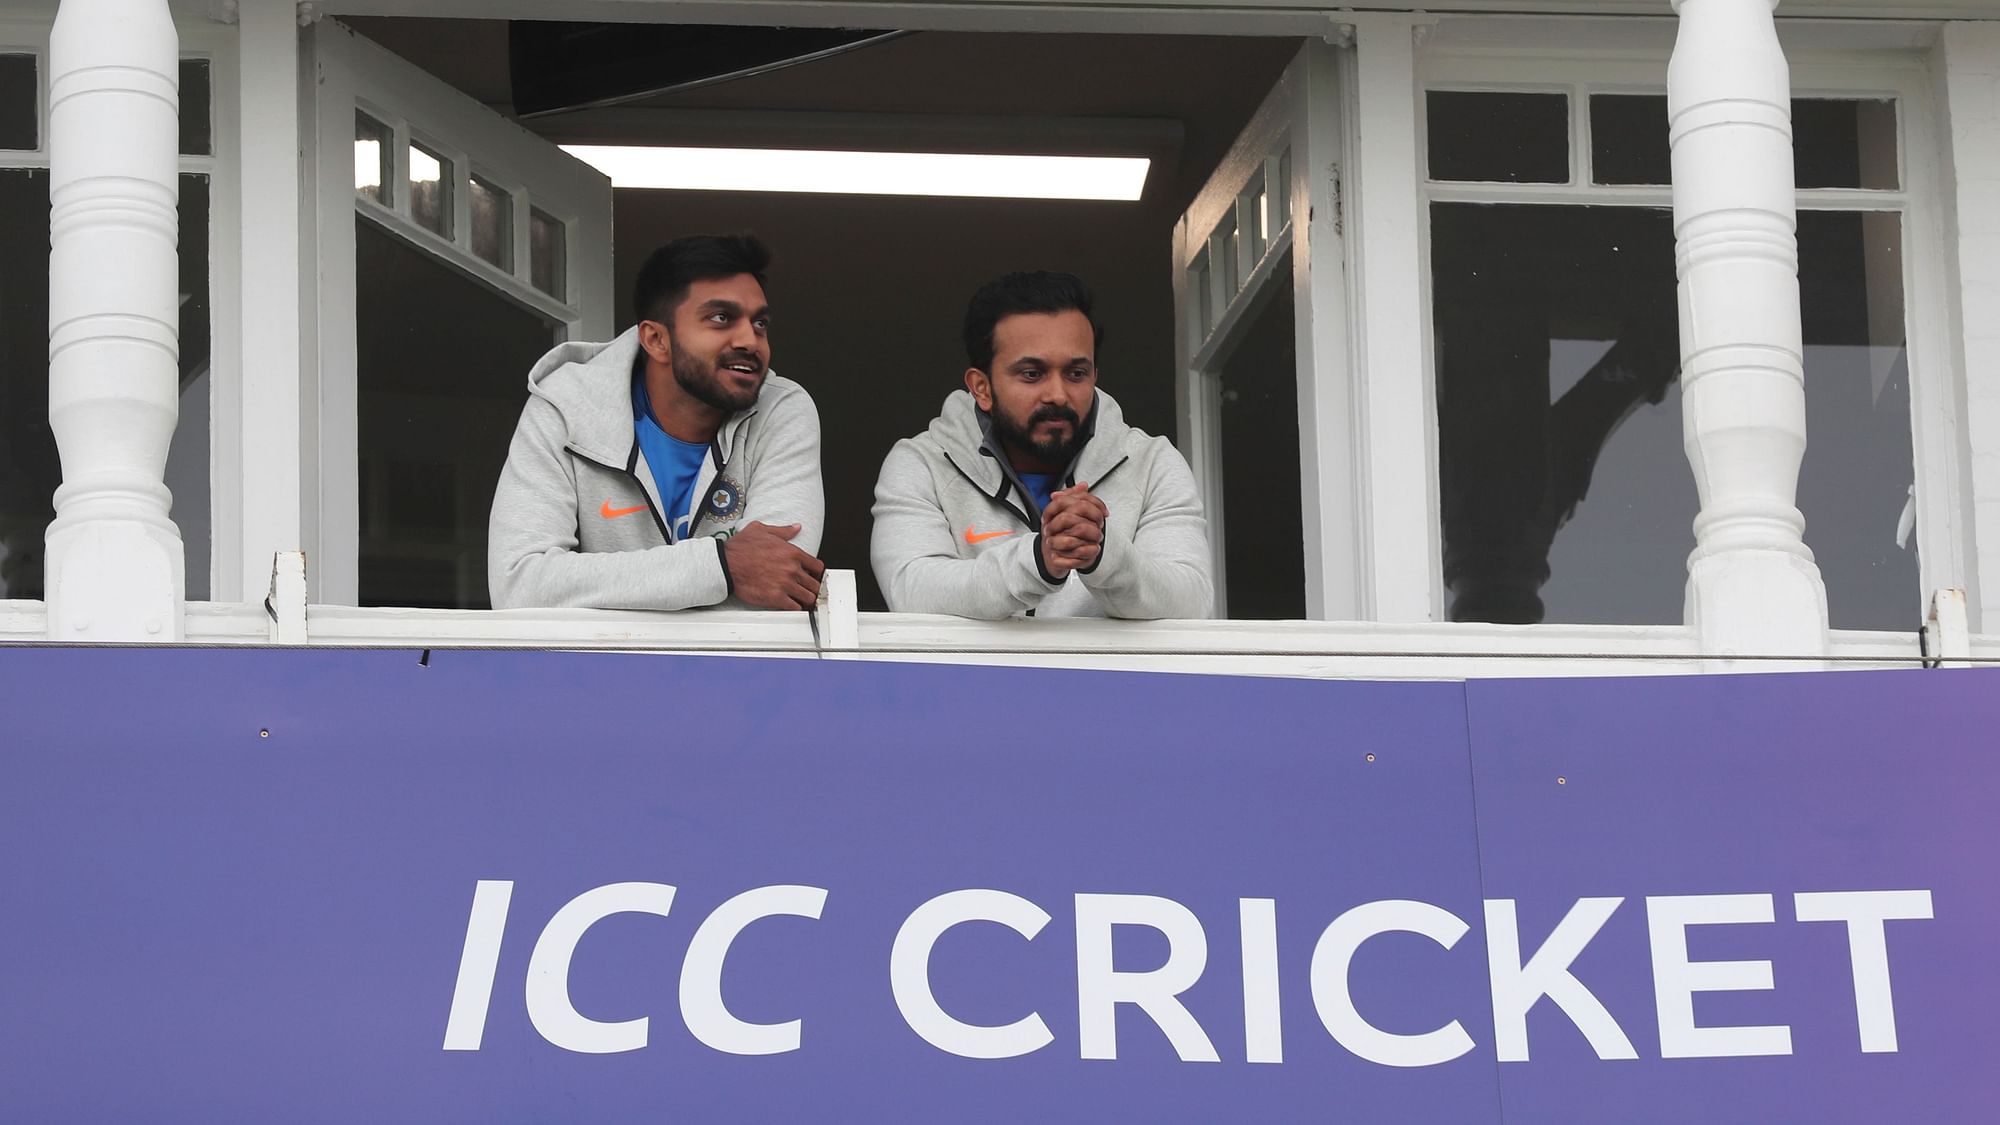 India’s Previous game against New Zealand was washed out due to rain.